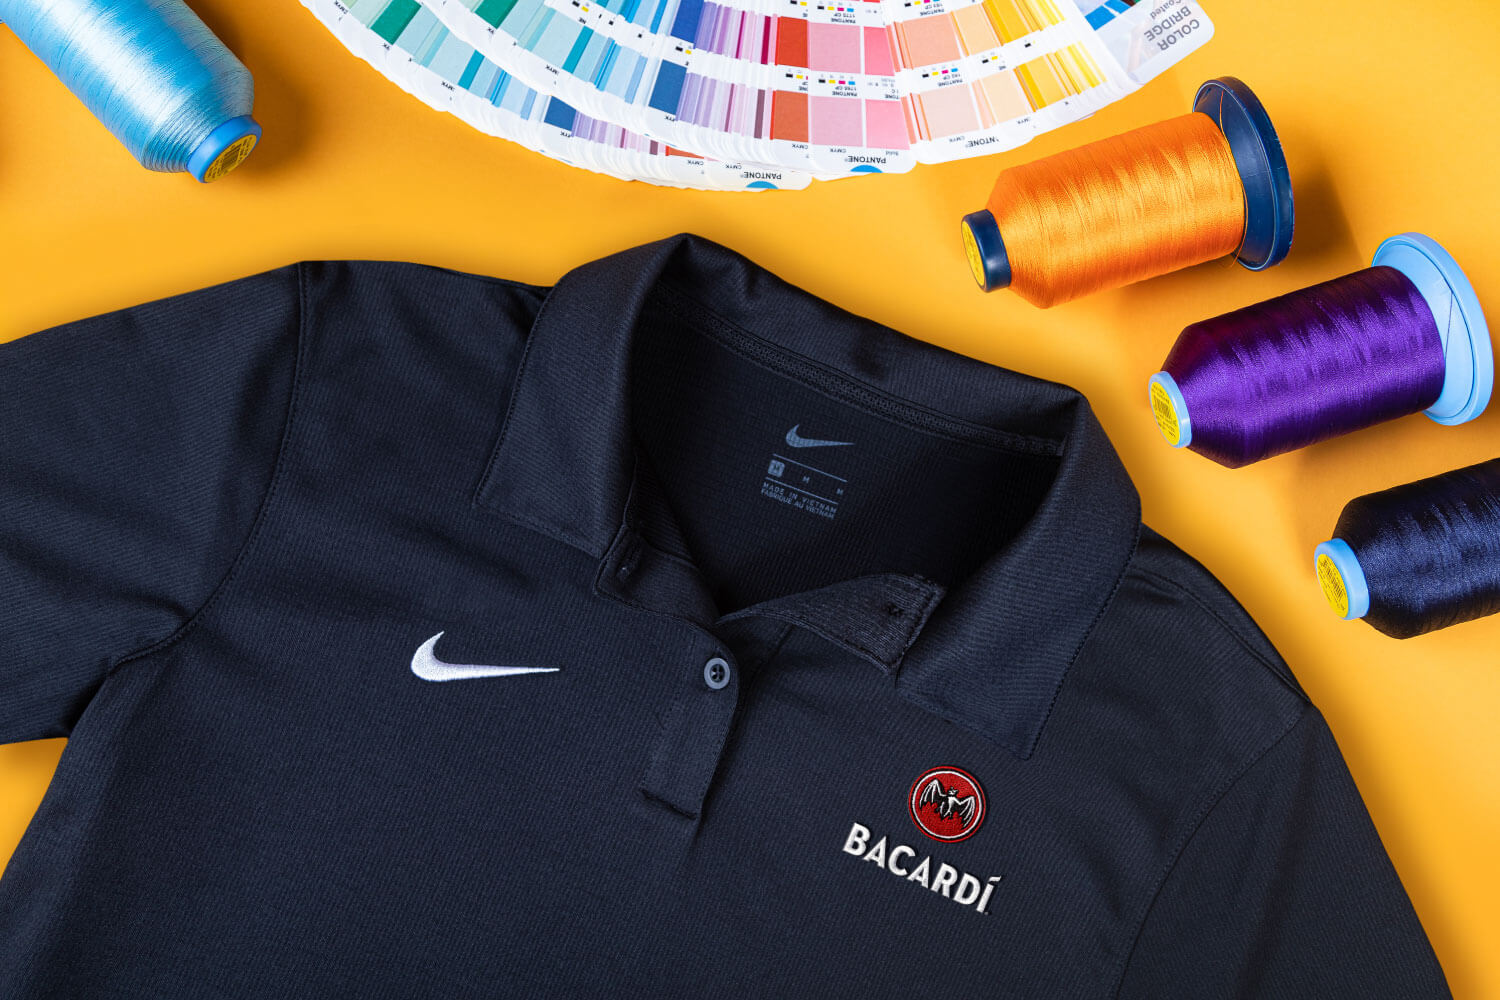 Get More Out of Your Branded Gear Thanks to Nike Apparel